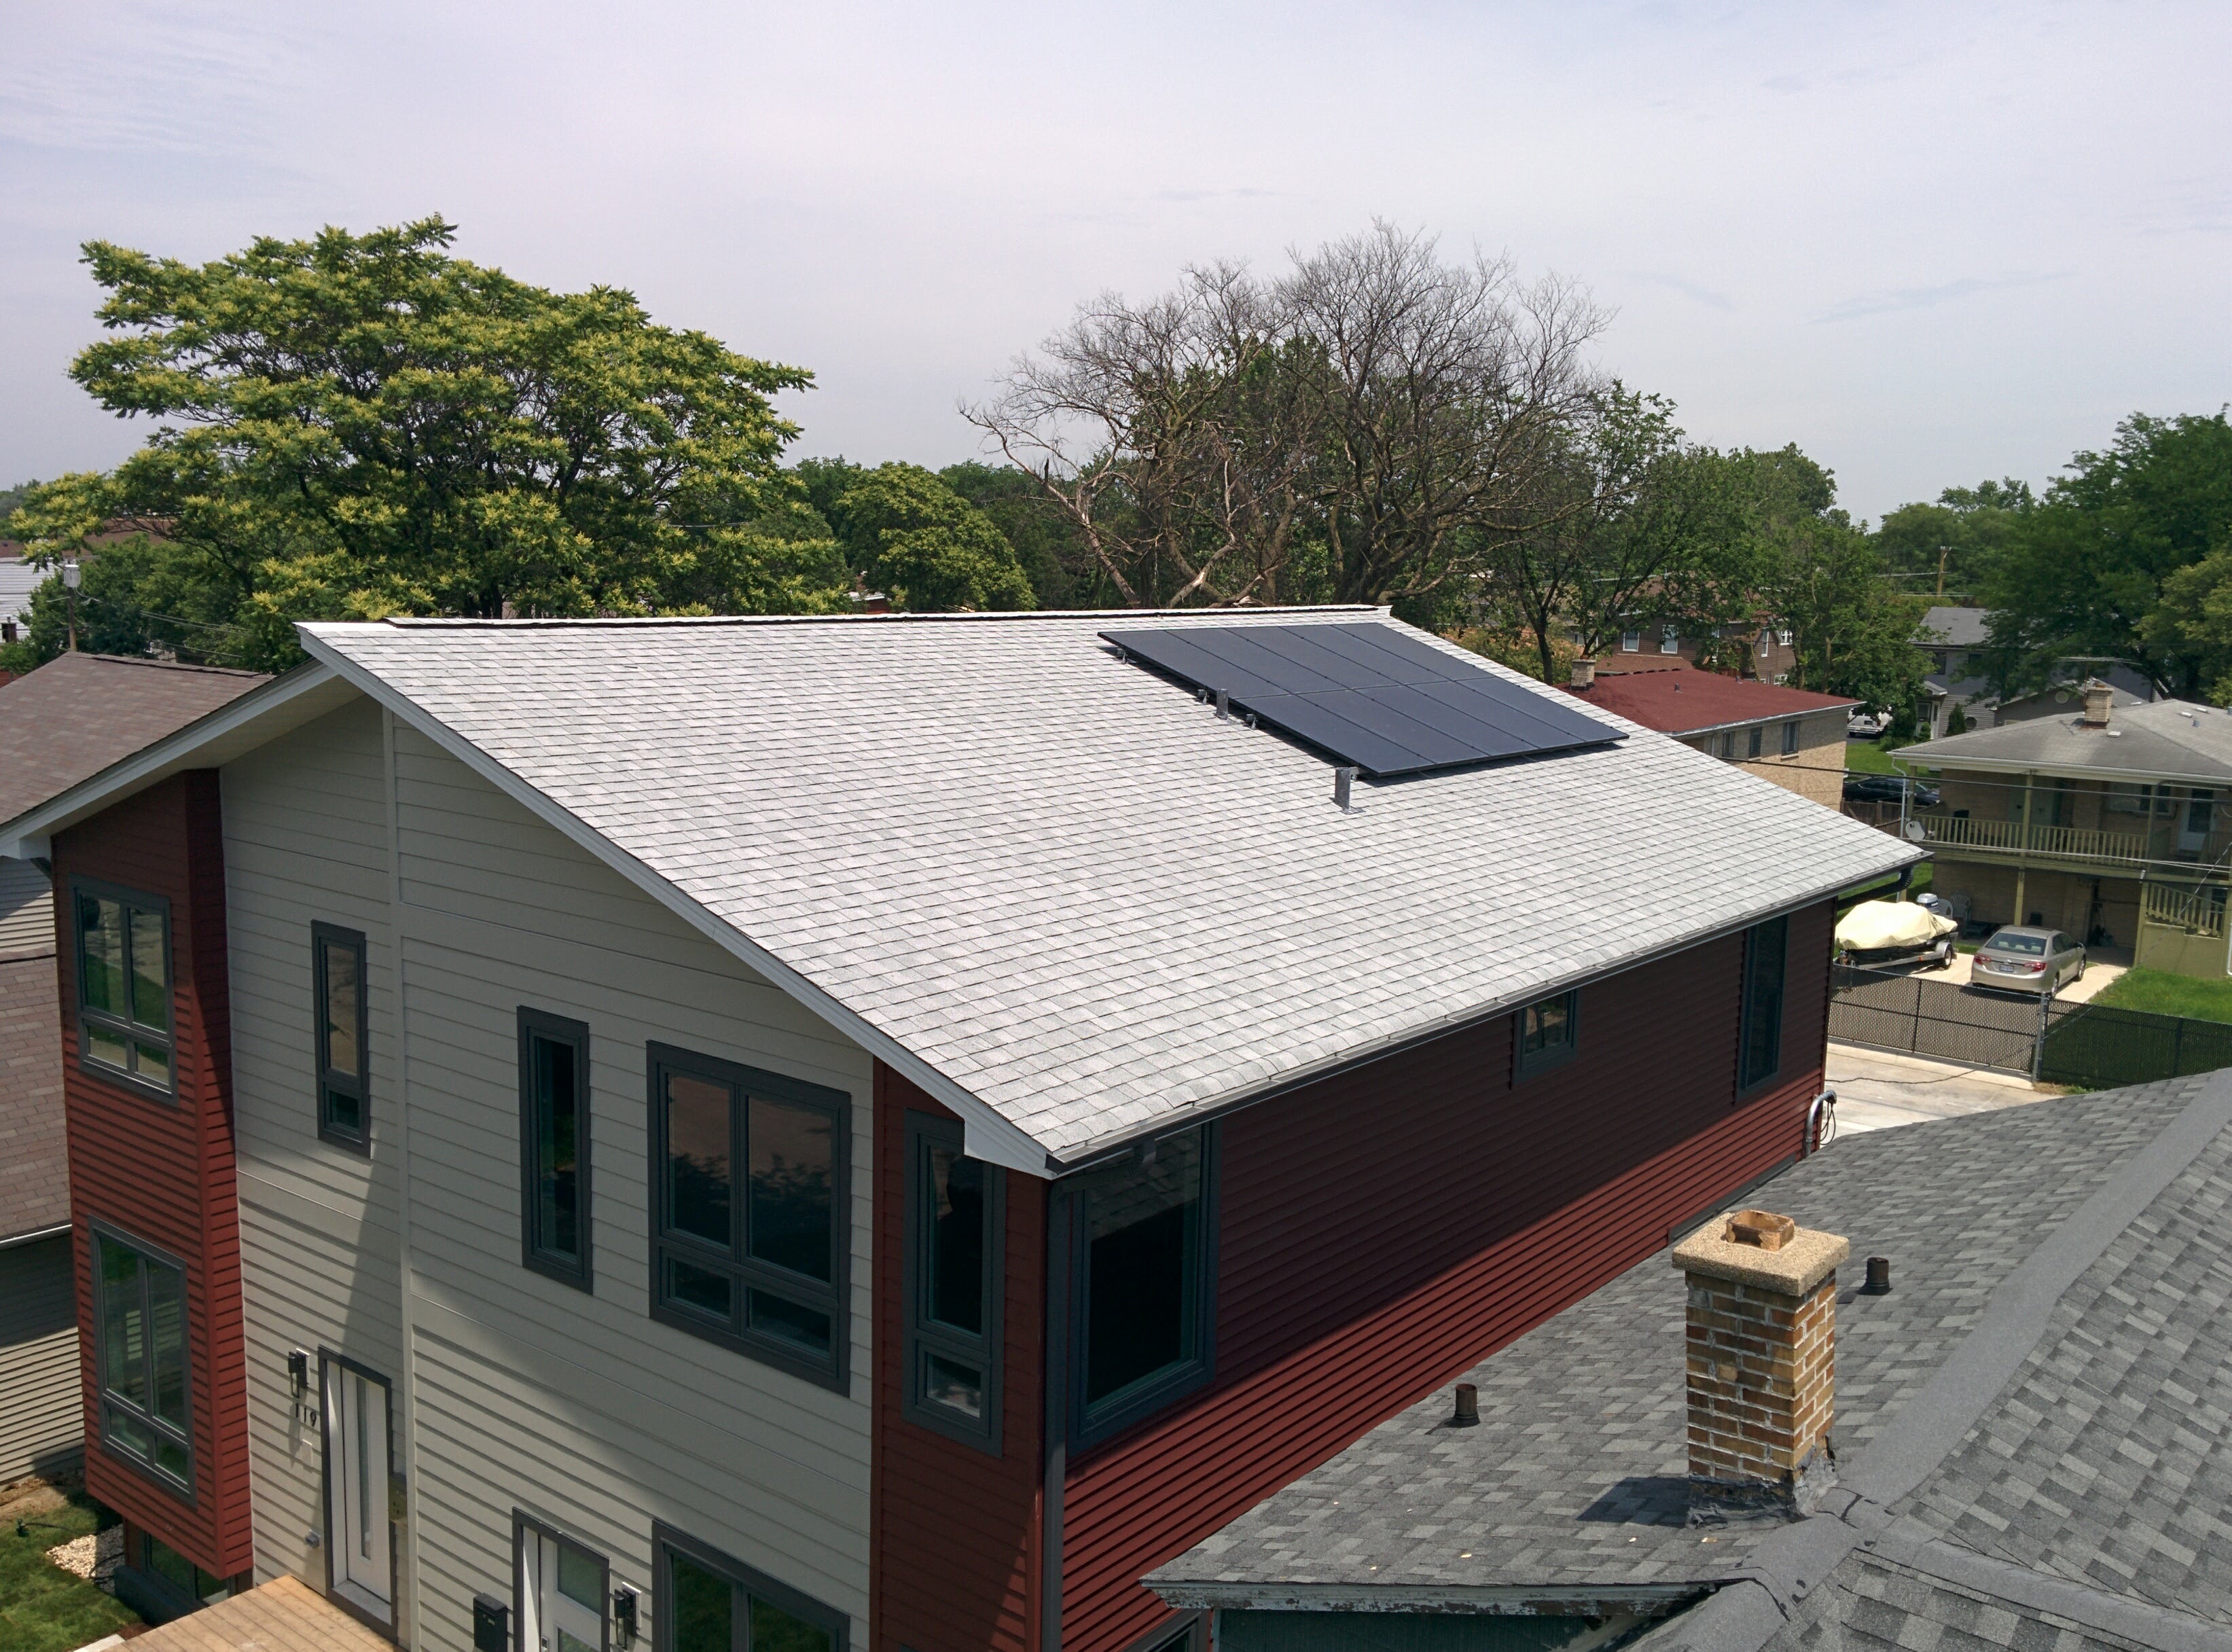 energy-star-reflective-shingles-cover-the-roof-which-is-ideally-angled